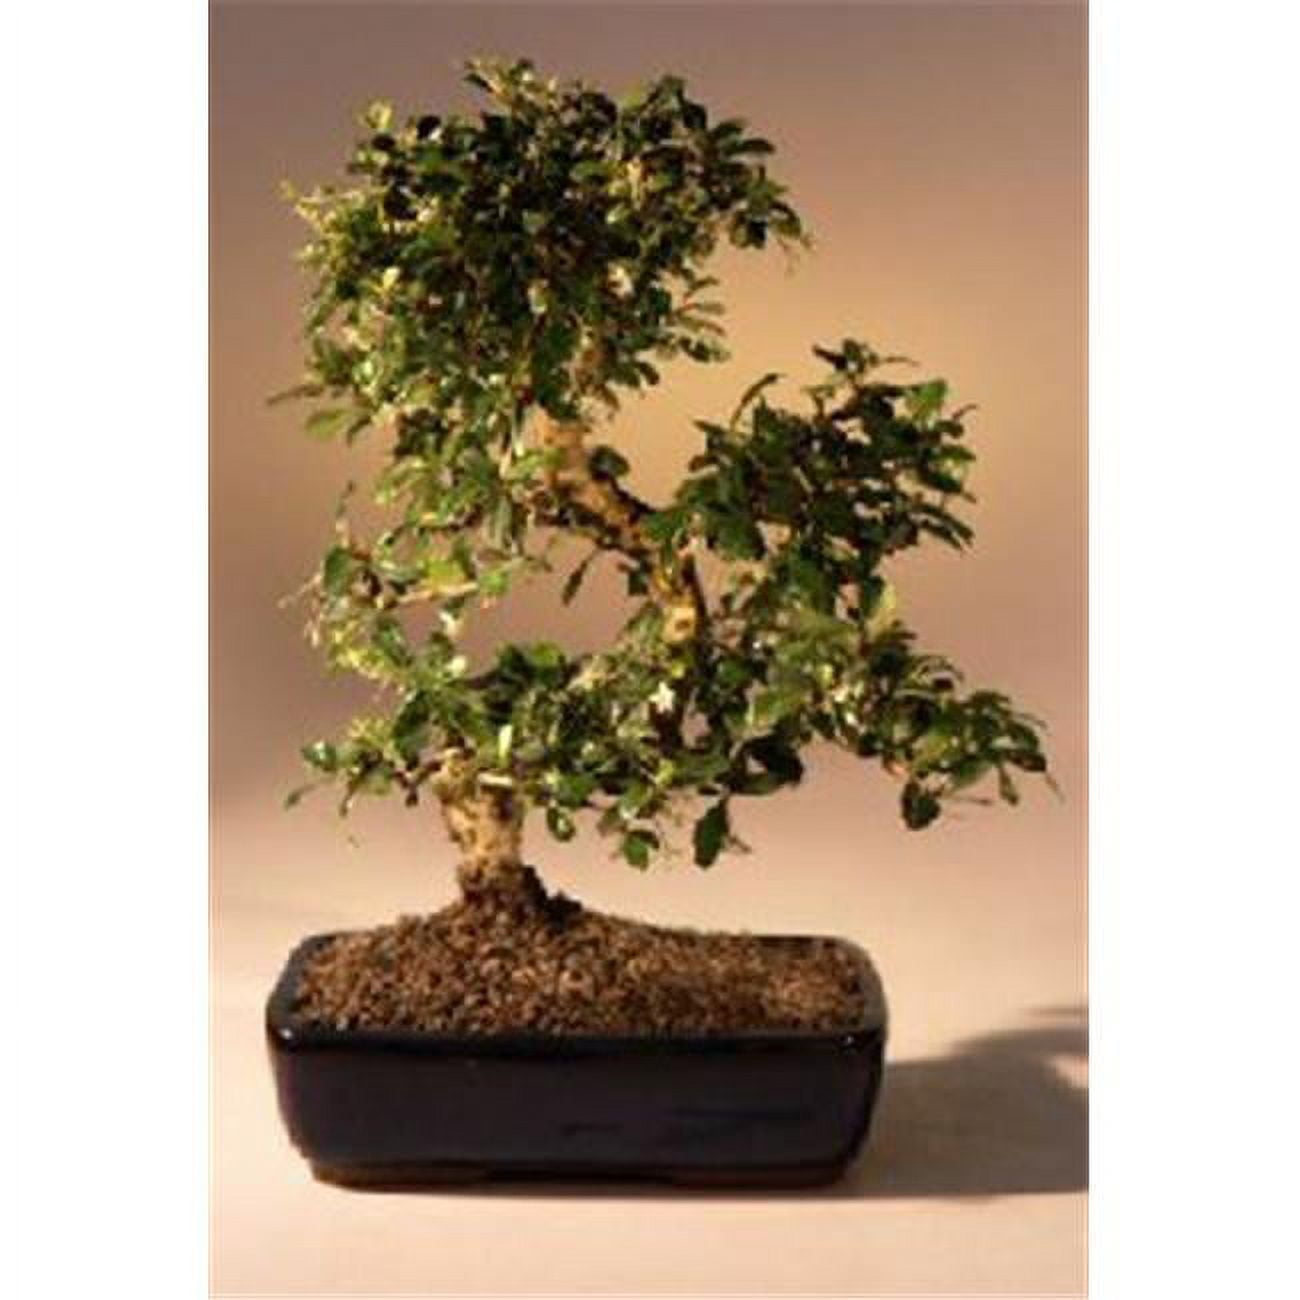 Picture of Bonsai Boy e2791 Fukien Tea Flowering Bonsai Tree with Curved Trunk Style - Ehretia Microphylla - Extra Large